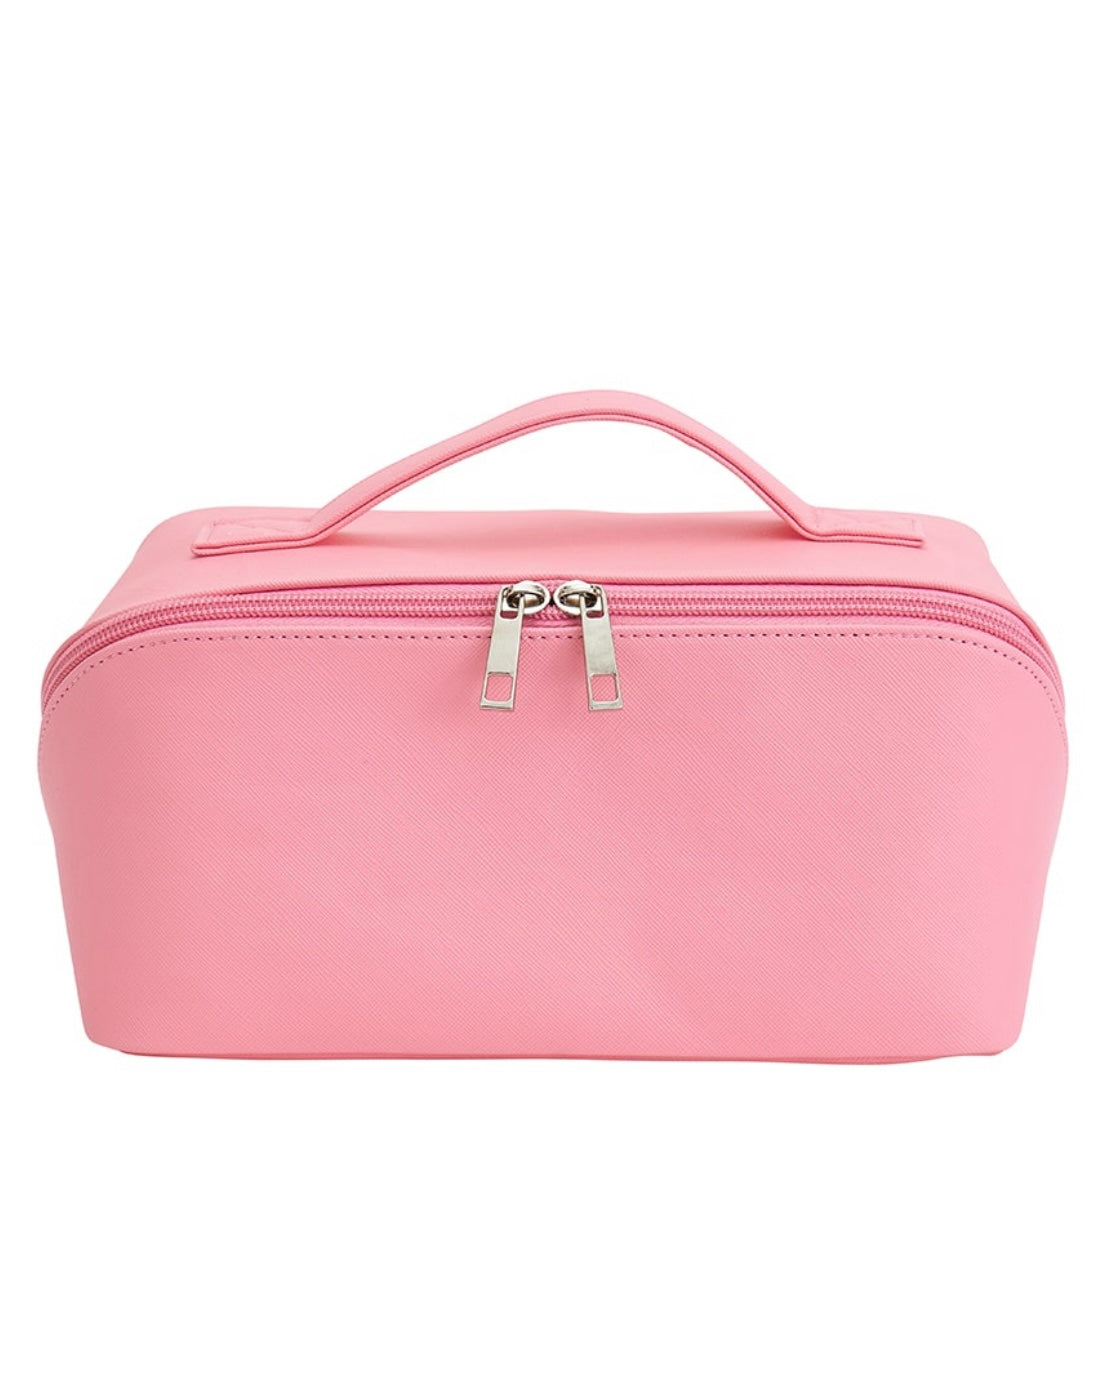 annabel trends, easy access, makeup bag, toiletry bag, wash bag, pink